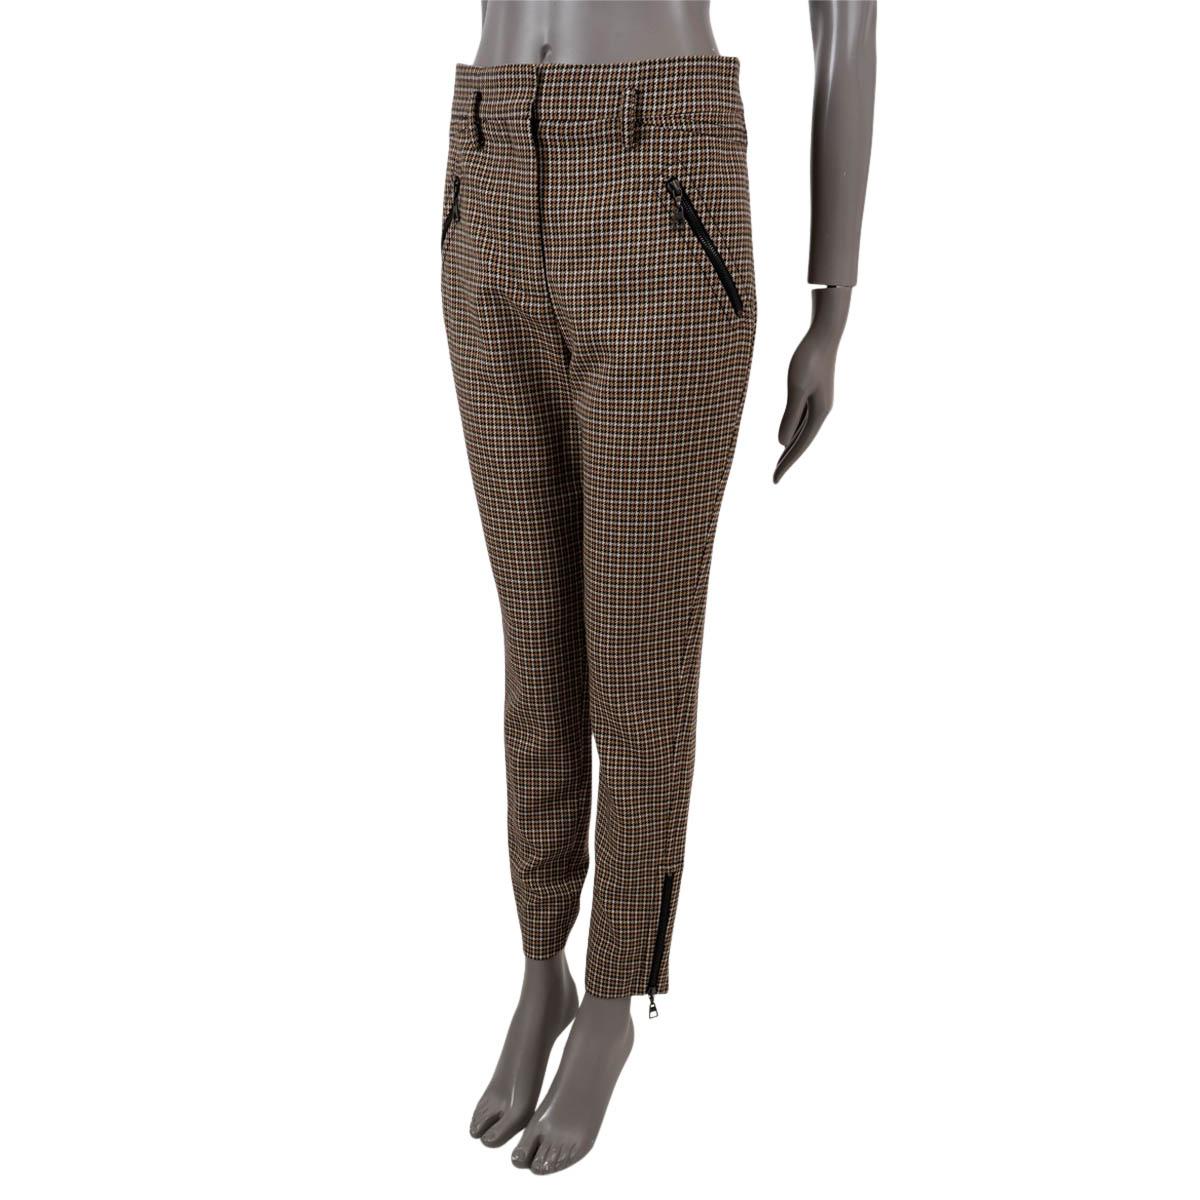 100% authentic Louis Vuitton houndstooth pants in beige, cream, black and chocolate brown wool (100%). Features a tapered leg with zippers at the cuffs, two zipper pockets on the front and belt loops. Open with a concealed hook and zipper. Have been